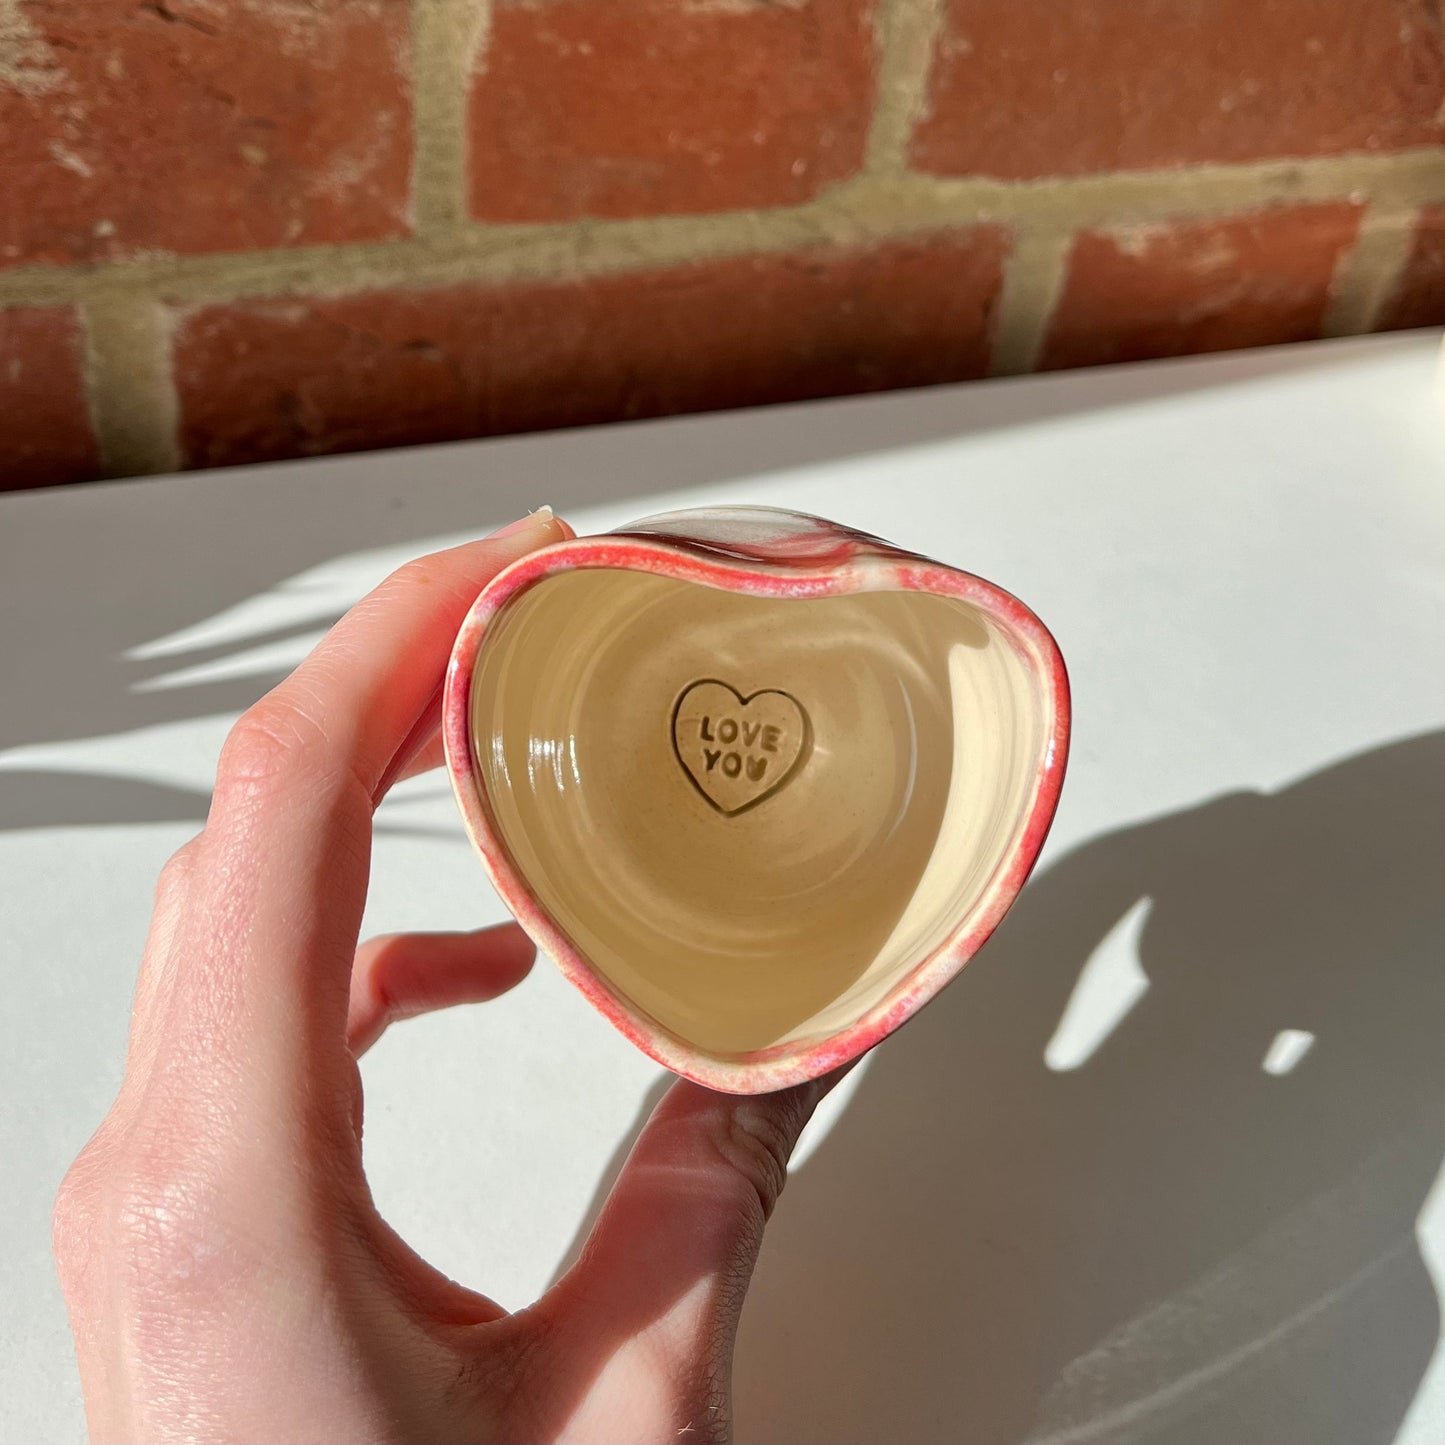 Imperfect Love You espresso cup